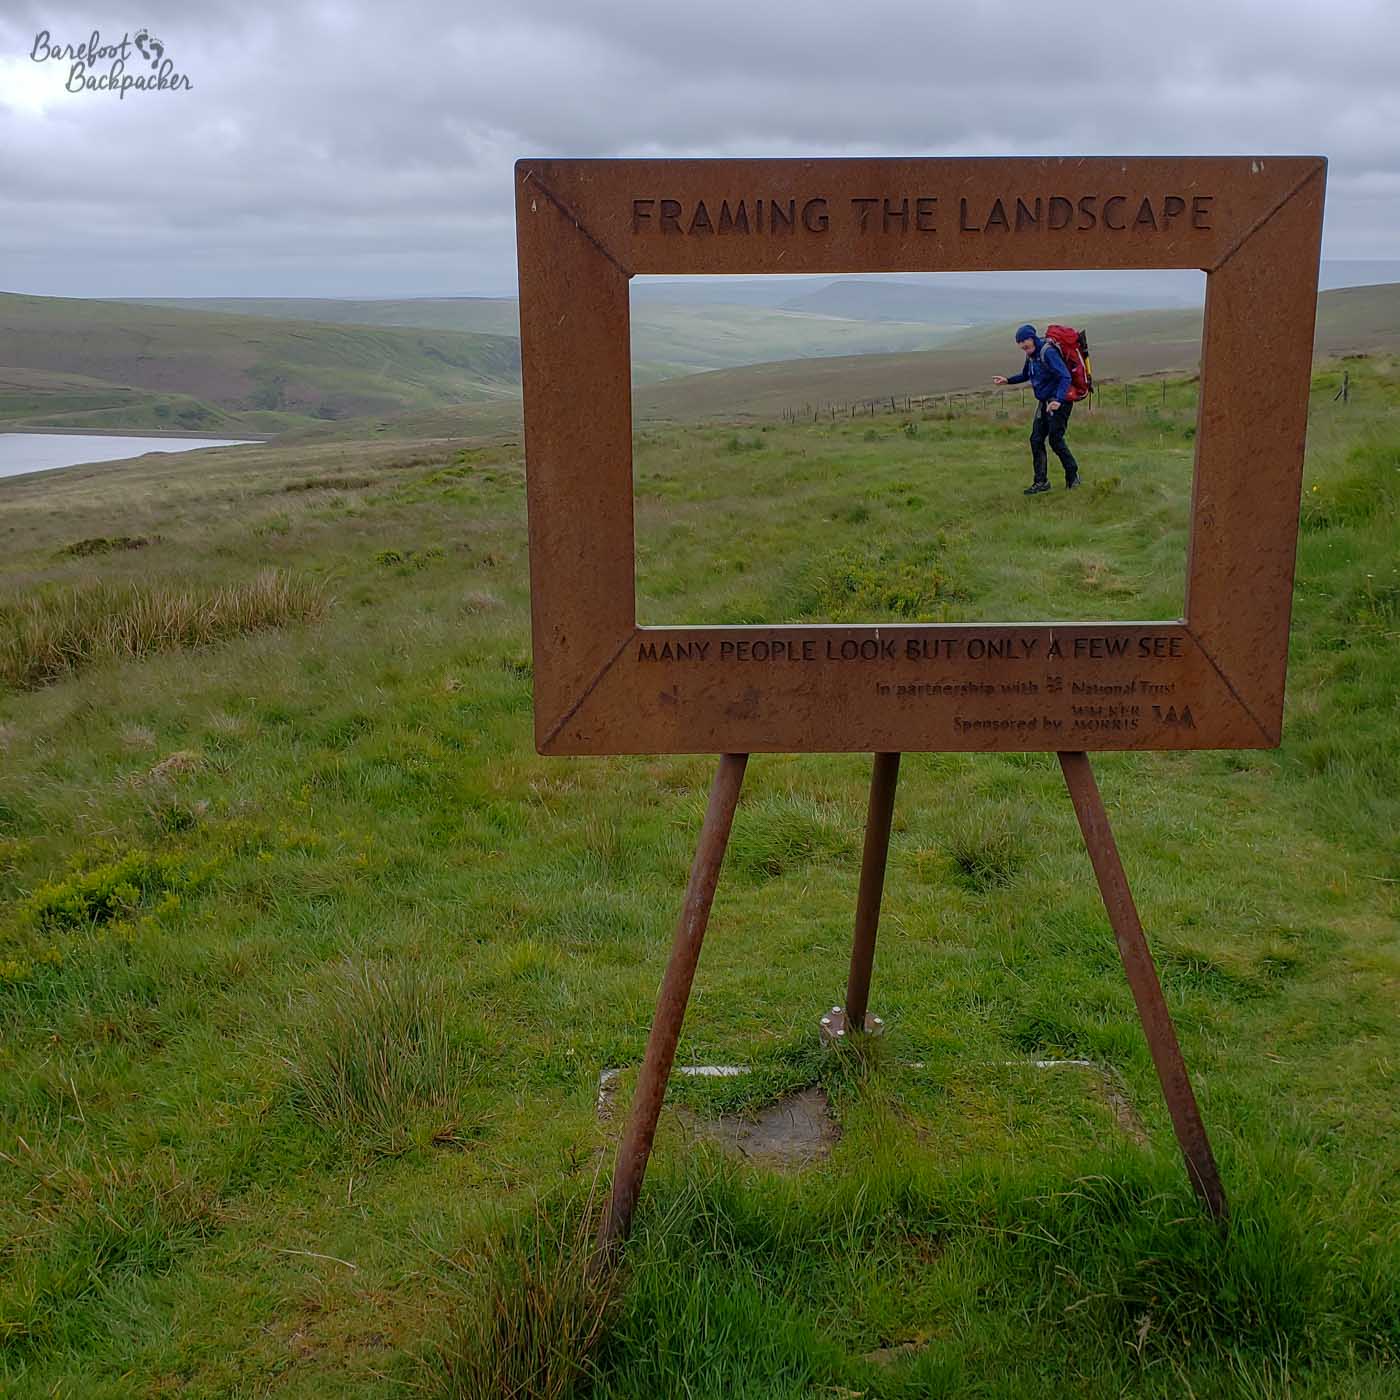 In damp, empty, moorland sloping down toward a reservoir is a large frame, like a picture frame, on three stilts. On the frame is written 'Framing the Landscape. Many people look but only a few see.'. Inside the frame, as it were, stands a backpacker/hiker, standing on the grass behind so their entire body is visible if you look through the frame.